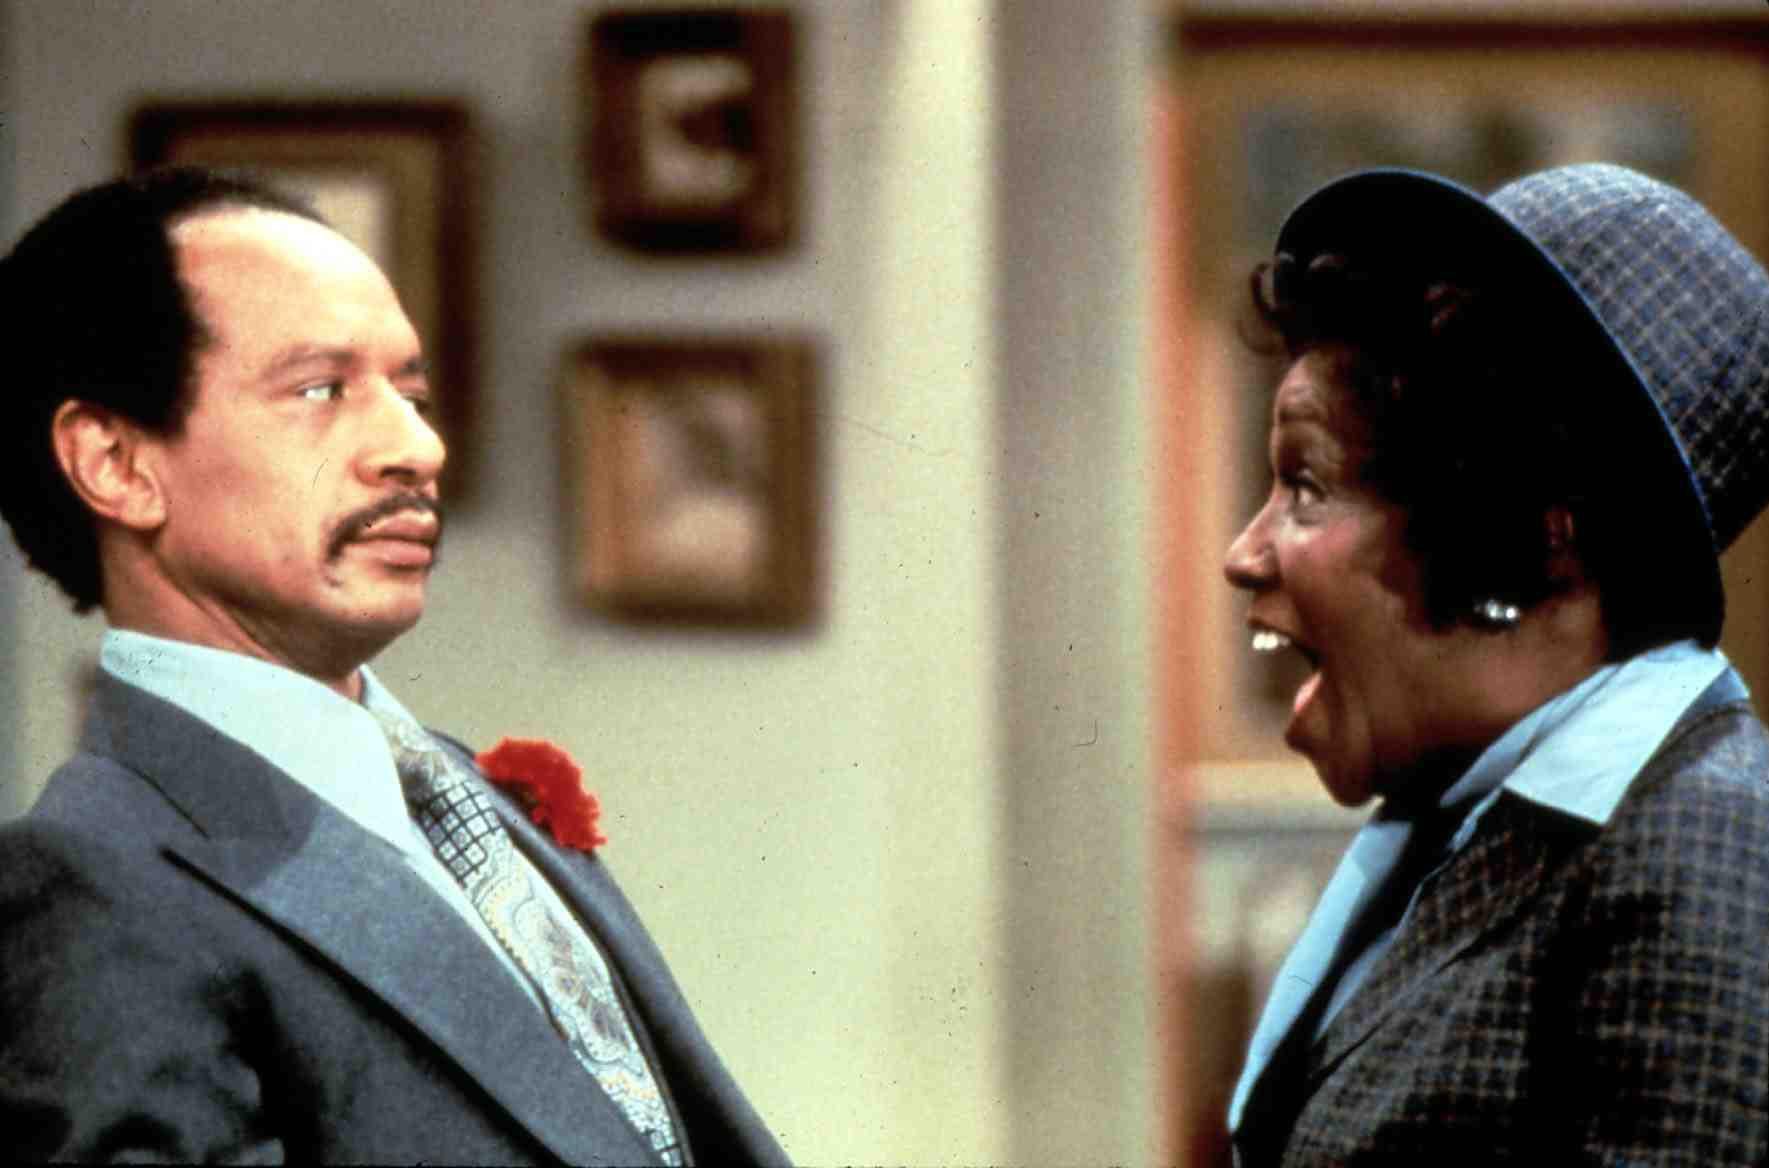 Sherman Hemsley and Isabel Sanford on the set of 'The Jeffersons'